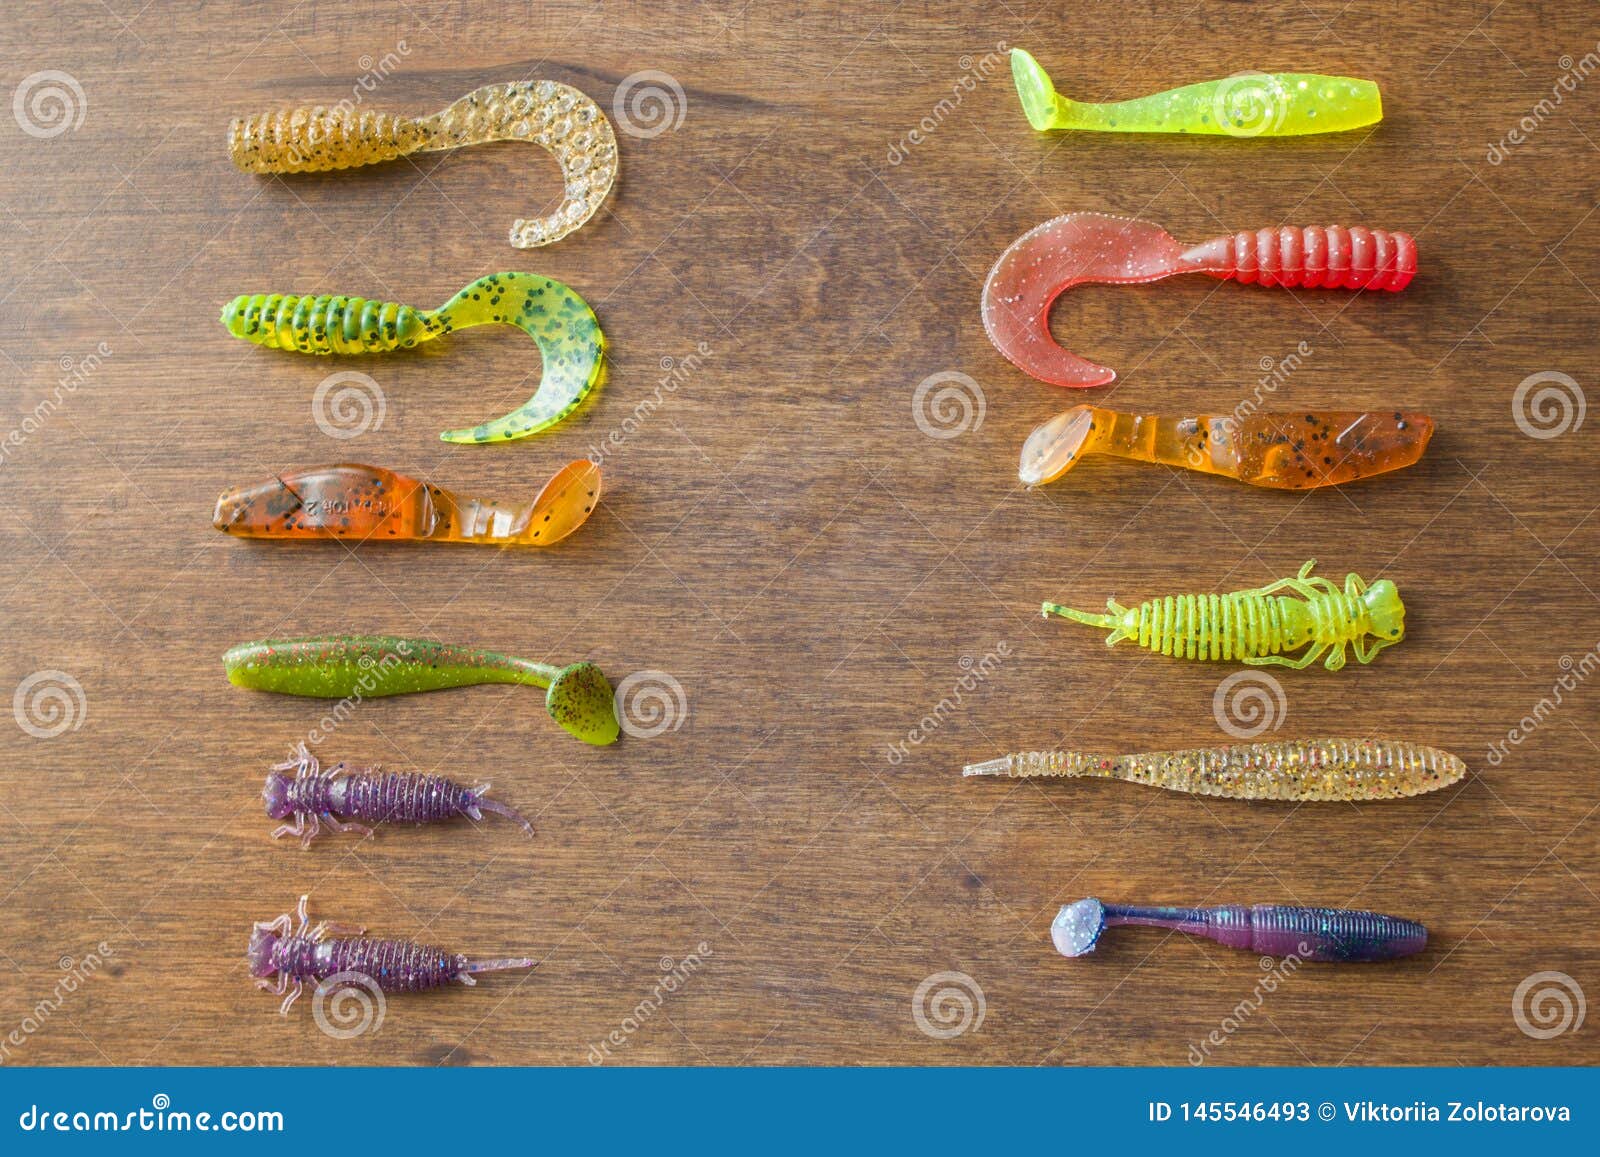 https://thumbs.dreamstime.com/z/fishing-soft-baits-wooden-background-group-isolated-silicone-lures-colourful-plastic-spinning-145546493.jpg